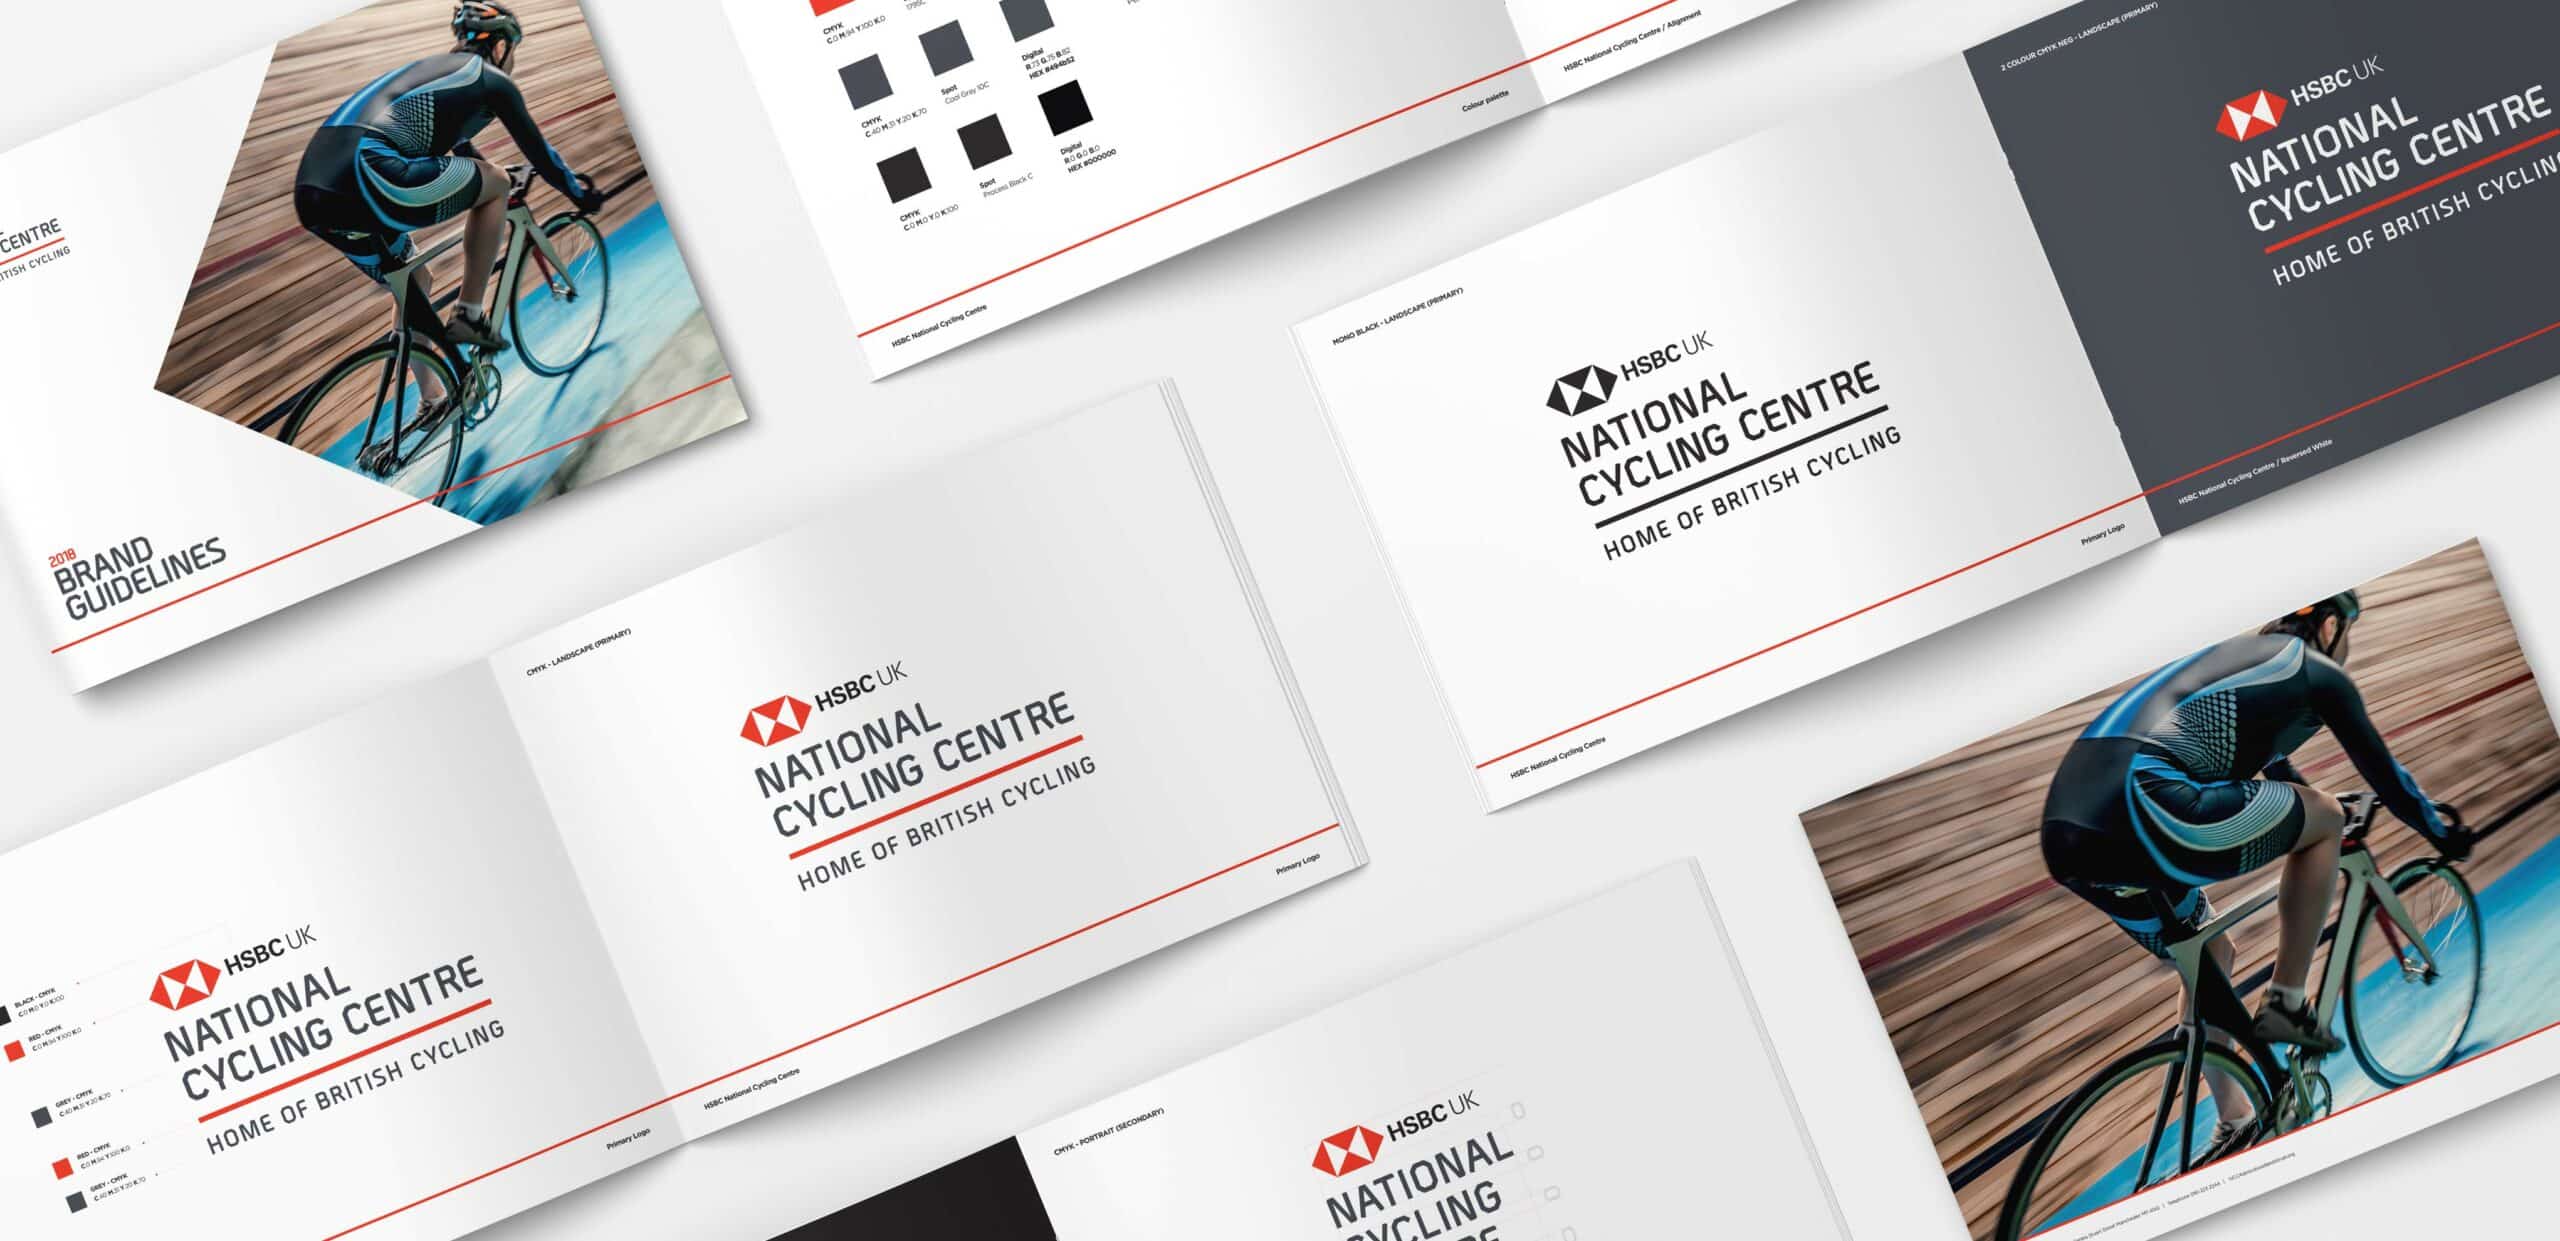 Several Pages of Branded Guidelines HSBC National Cycling Centre Brand Guidelines